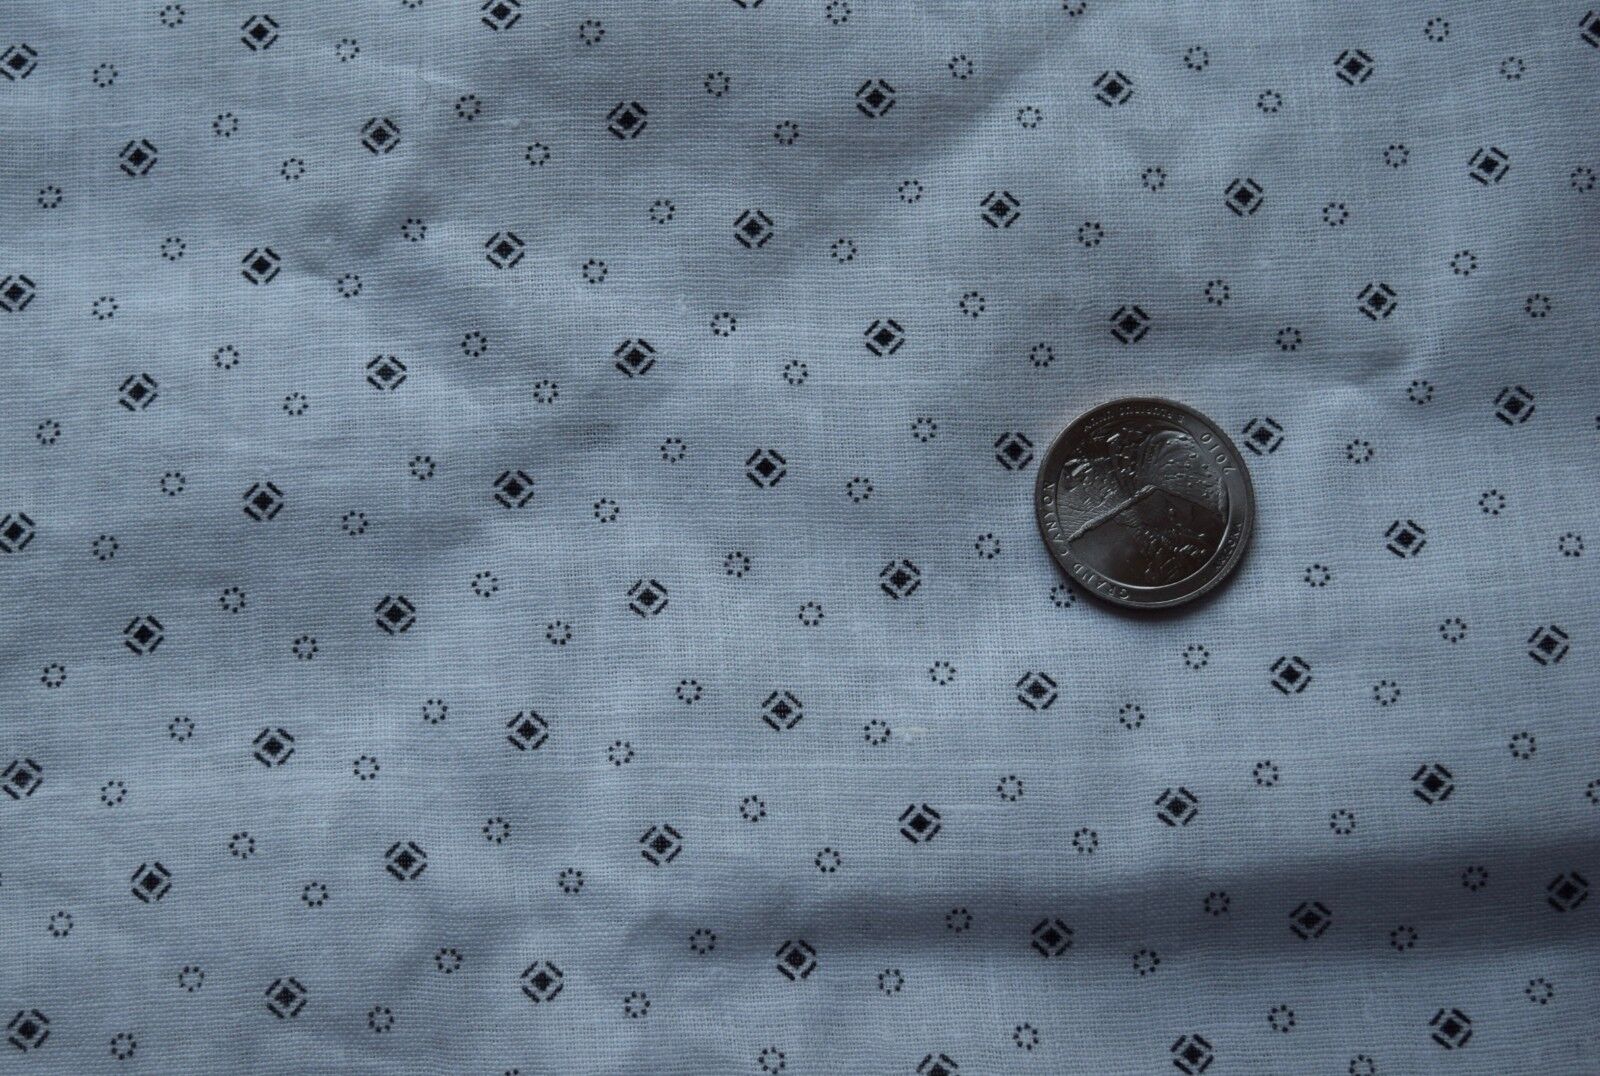 6954 1/2 yd antique 1880's cotton fabric, shirting, white with small black motif